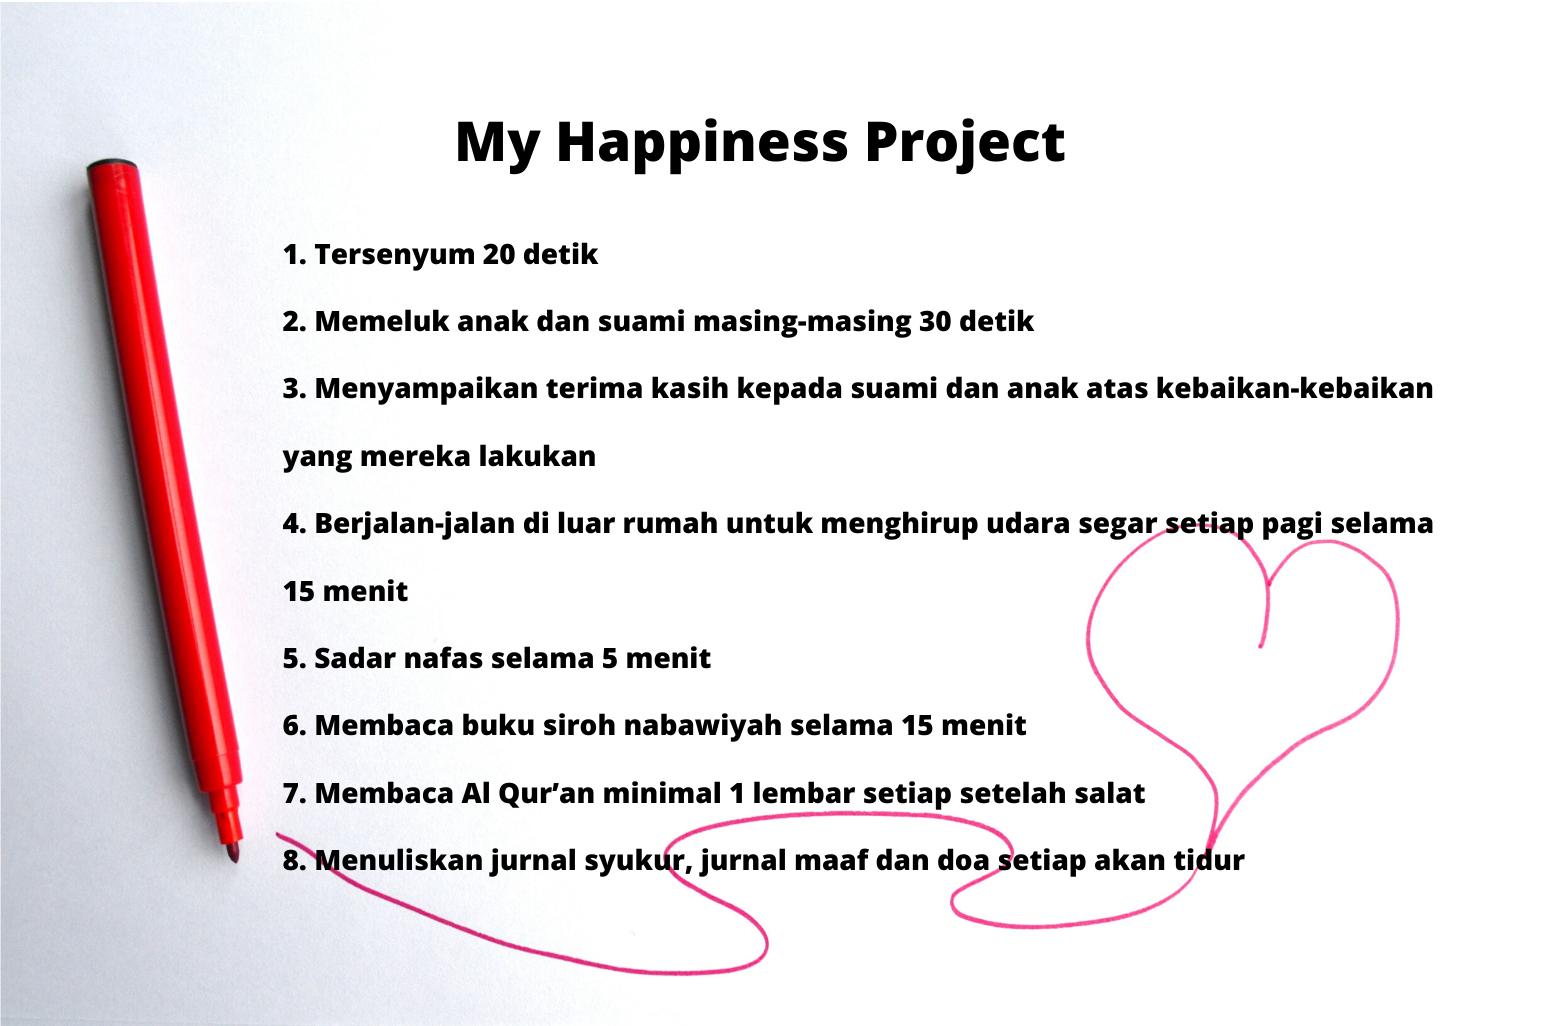 My Happiness Project.